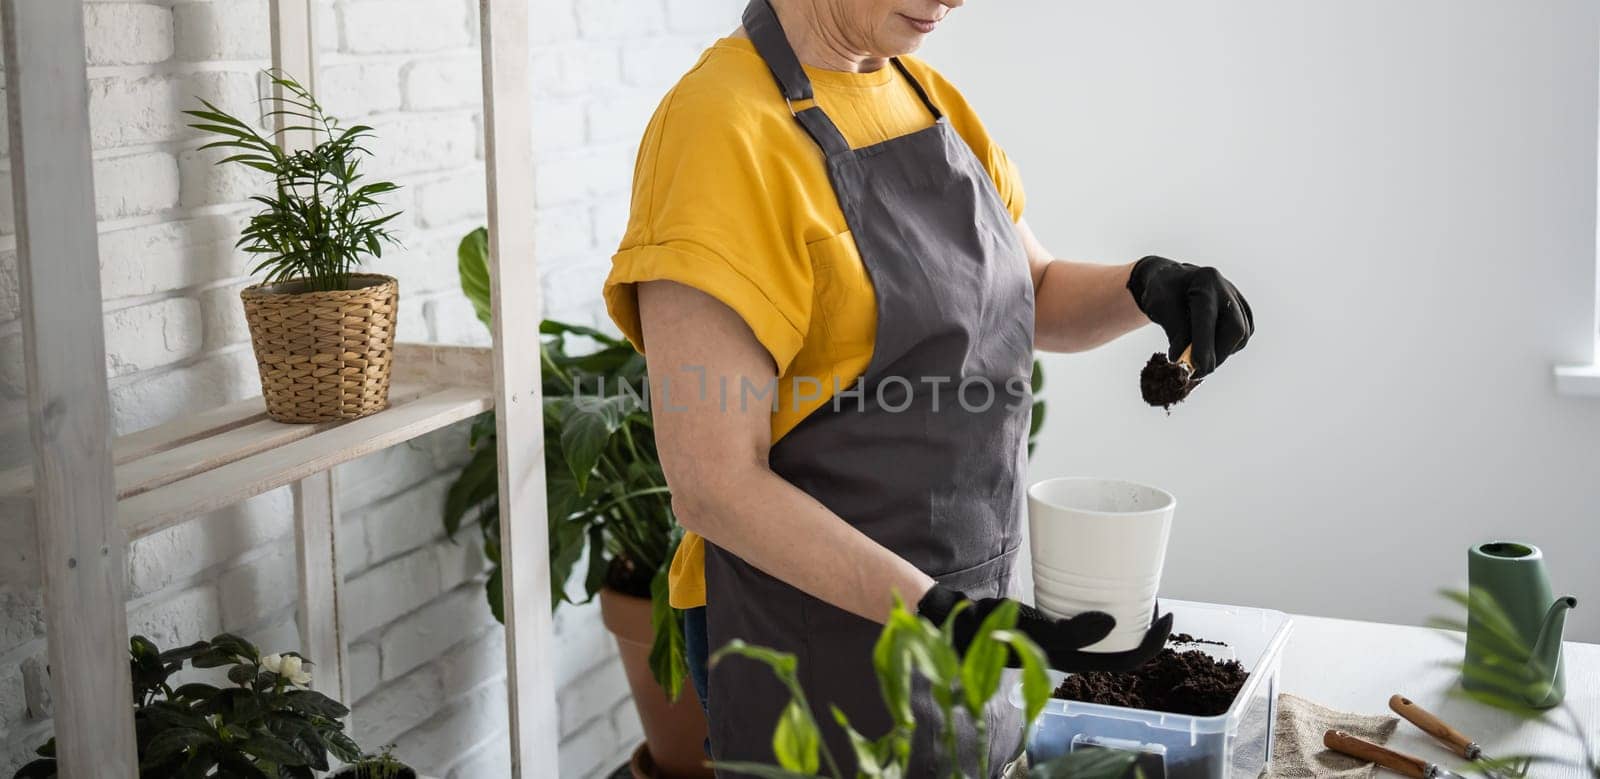 Middle aged woman in an apron clothes takes care of a potted plant in a pot. Home gardening and floriculture. House with green plants and cottagecore botanic florist